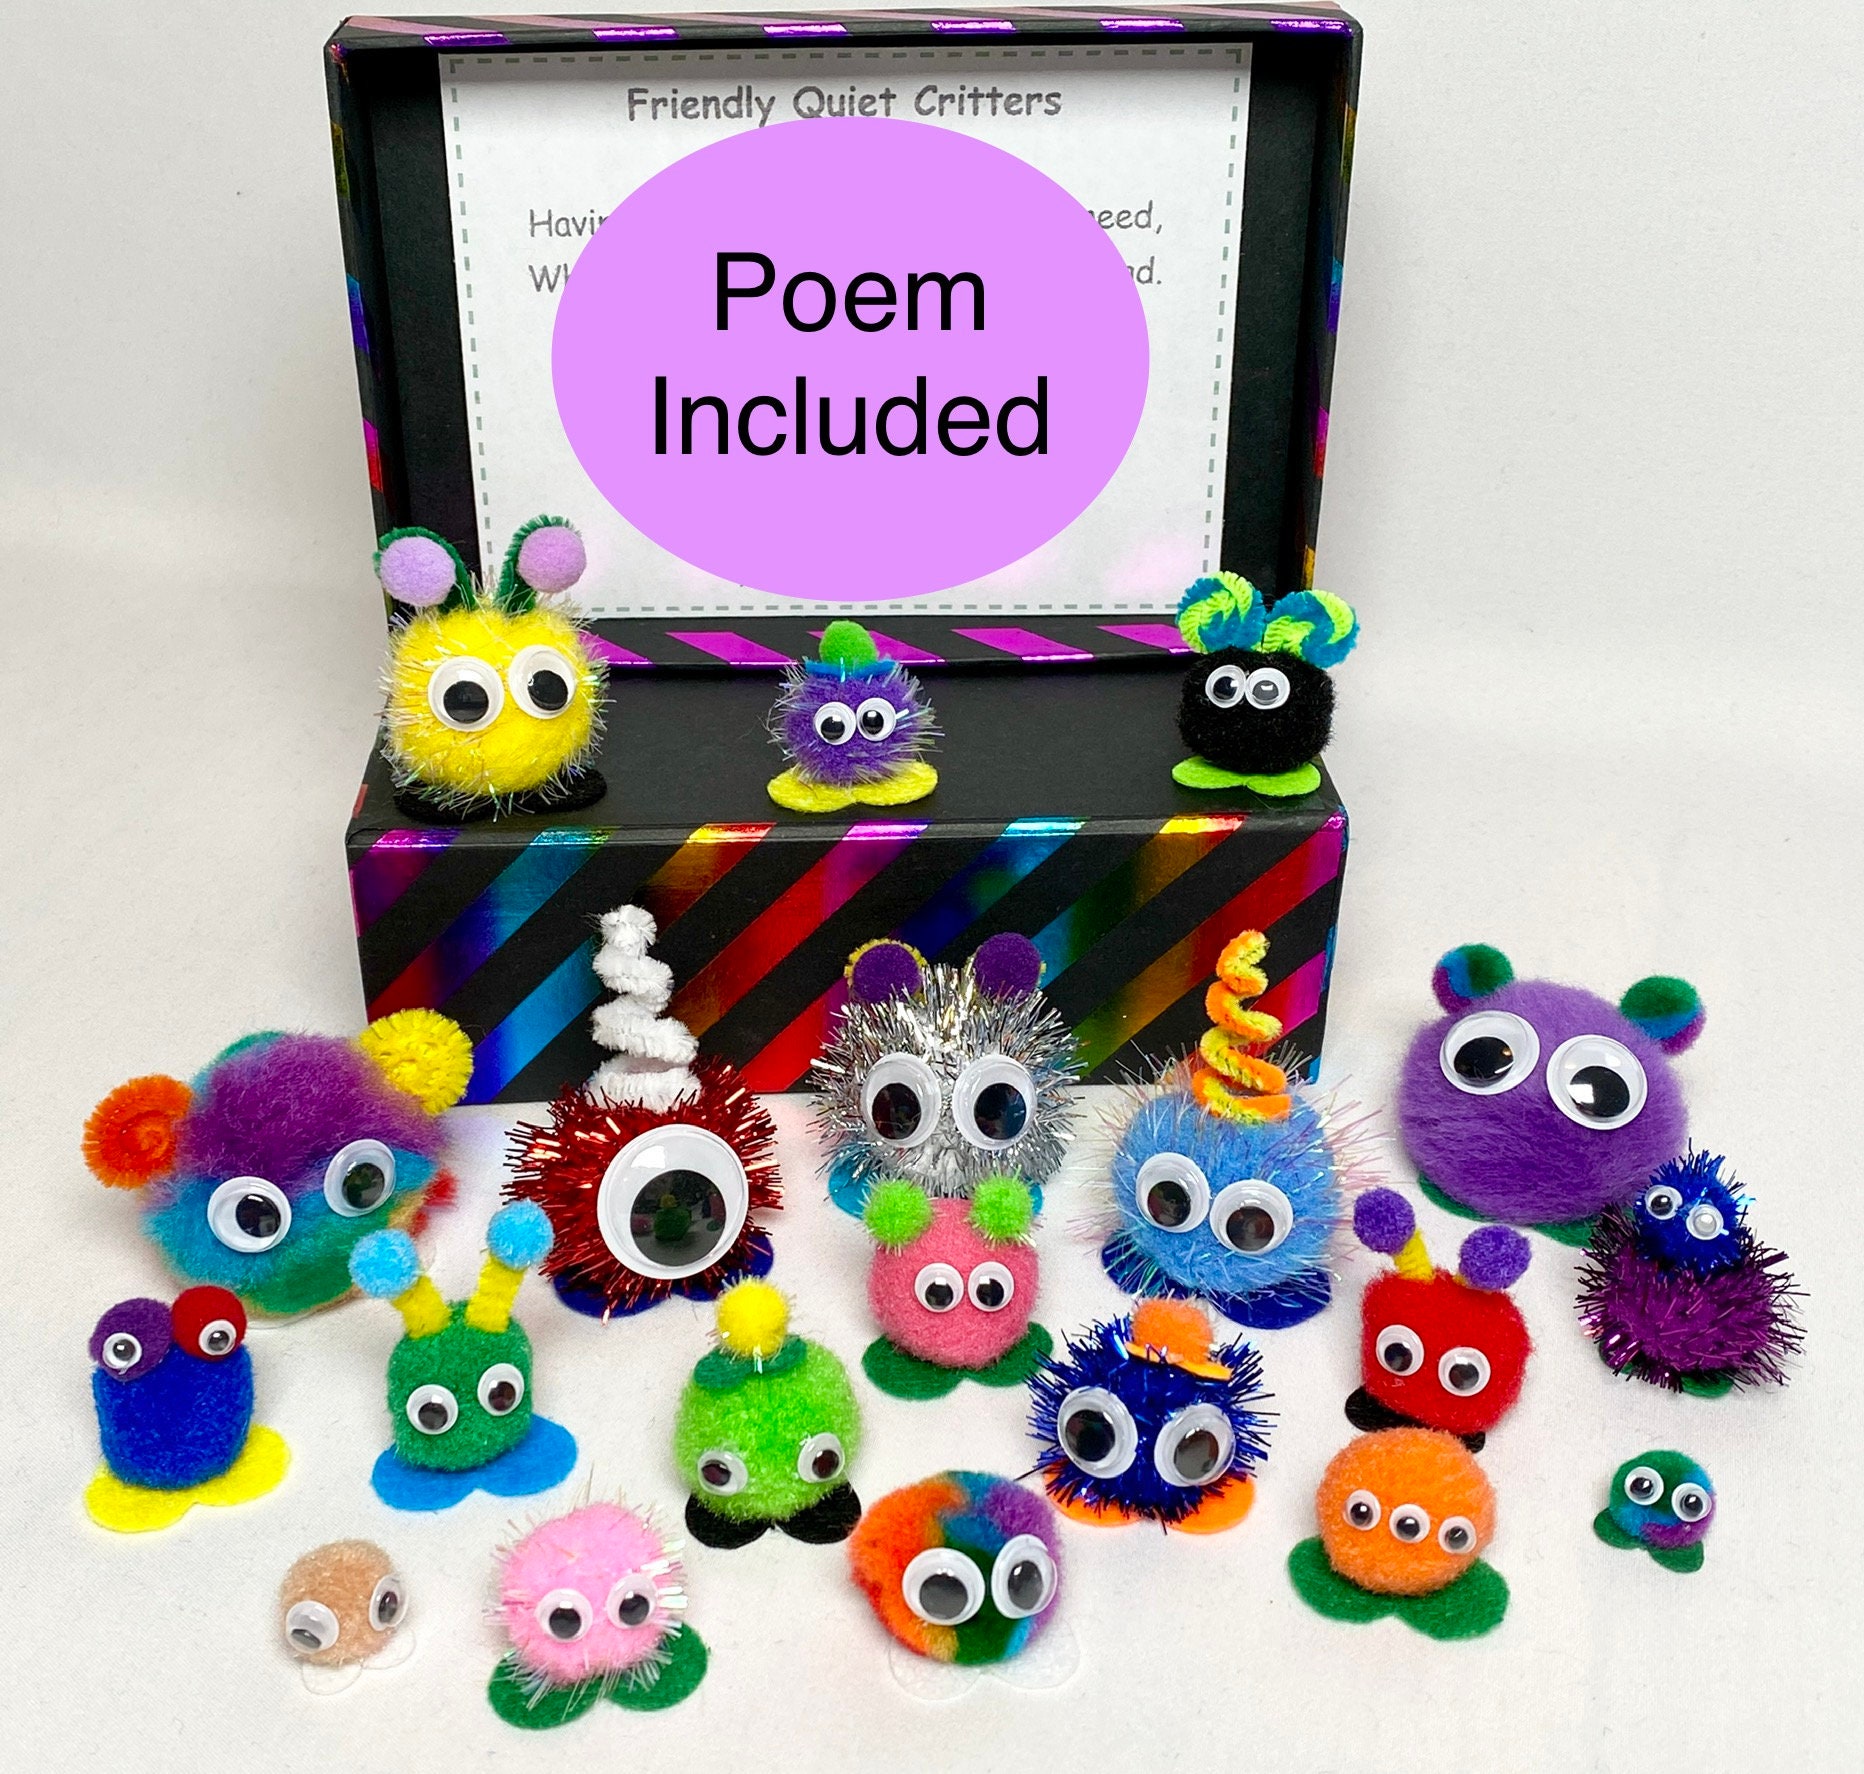 quiet-critters-with-poem-and-home-friendly-weepul-classroom-etsy